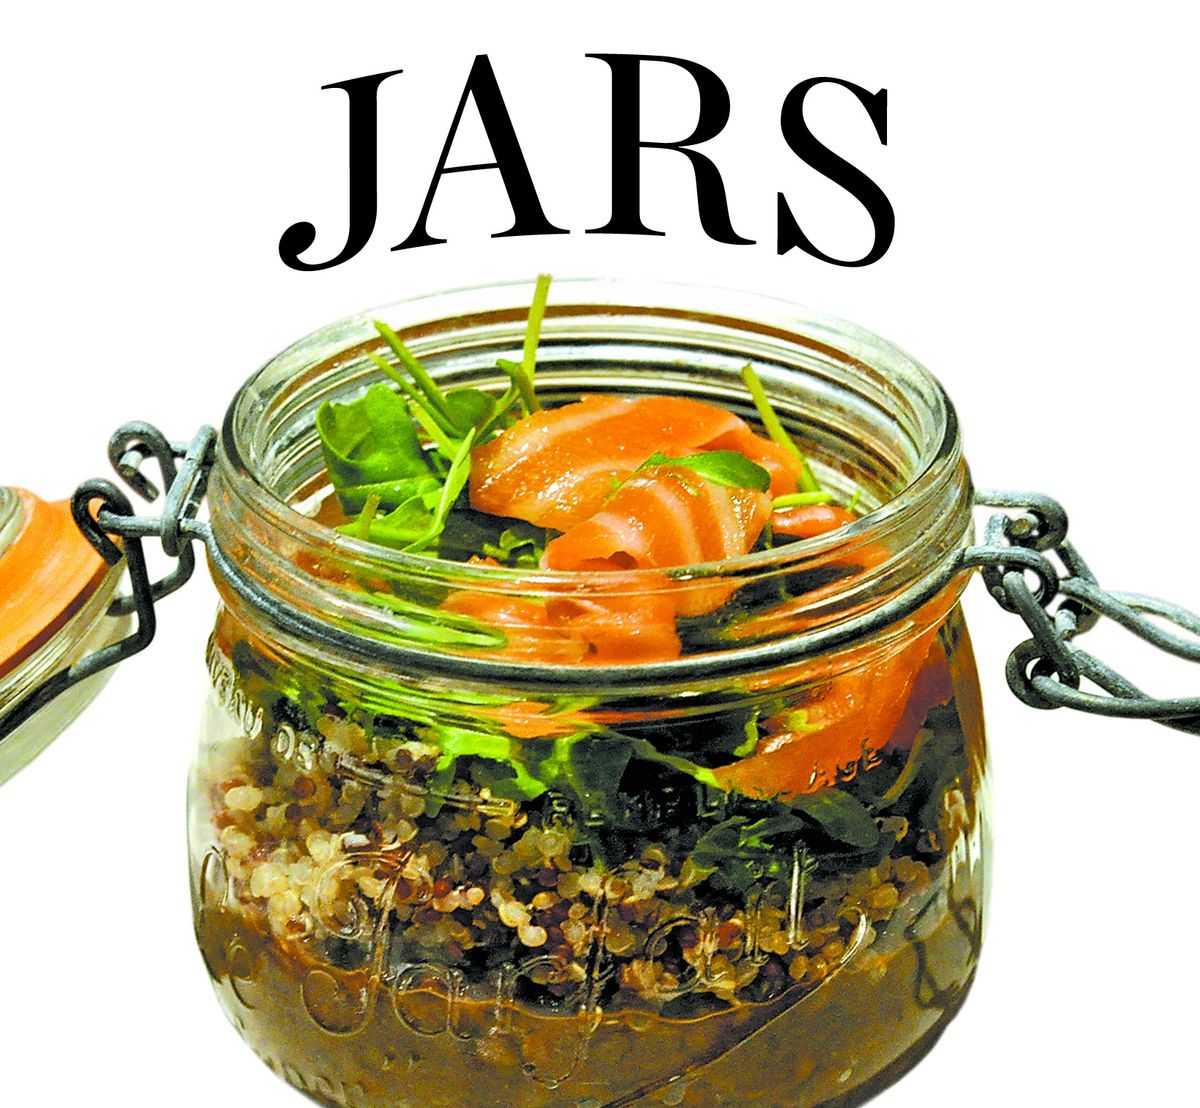 Pictured above: Jars, great for saving and using again and again for storing things, prove their versatility with dishes like this lentil salad with smoked salmon.  McClatchy-Tribune photo